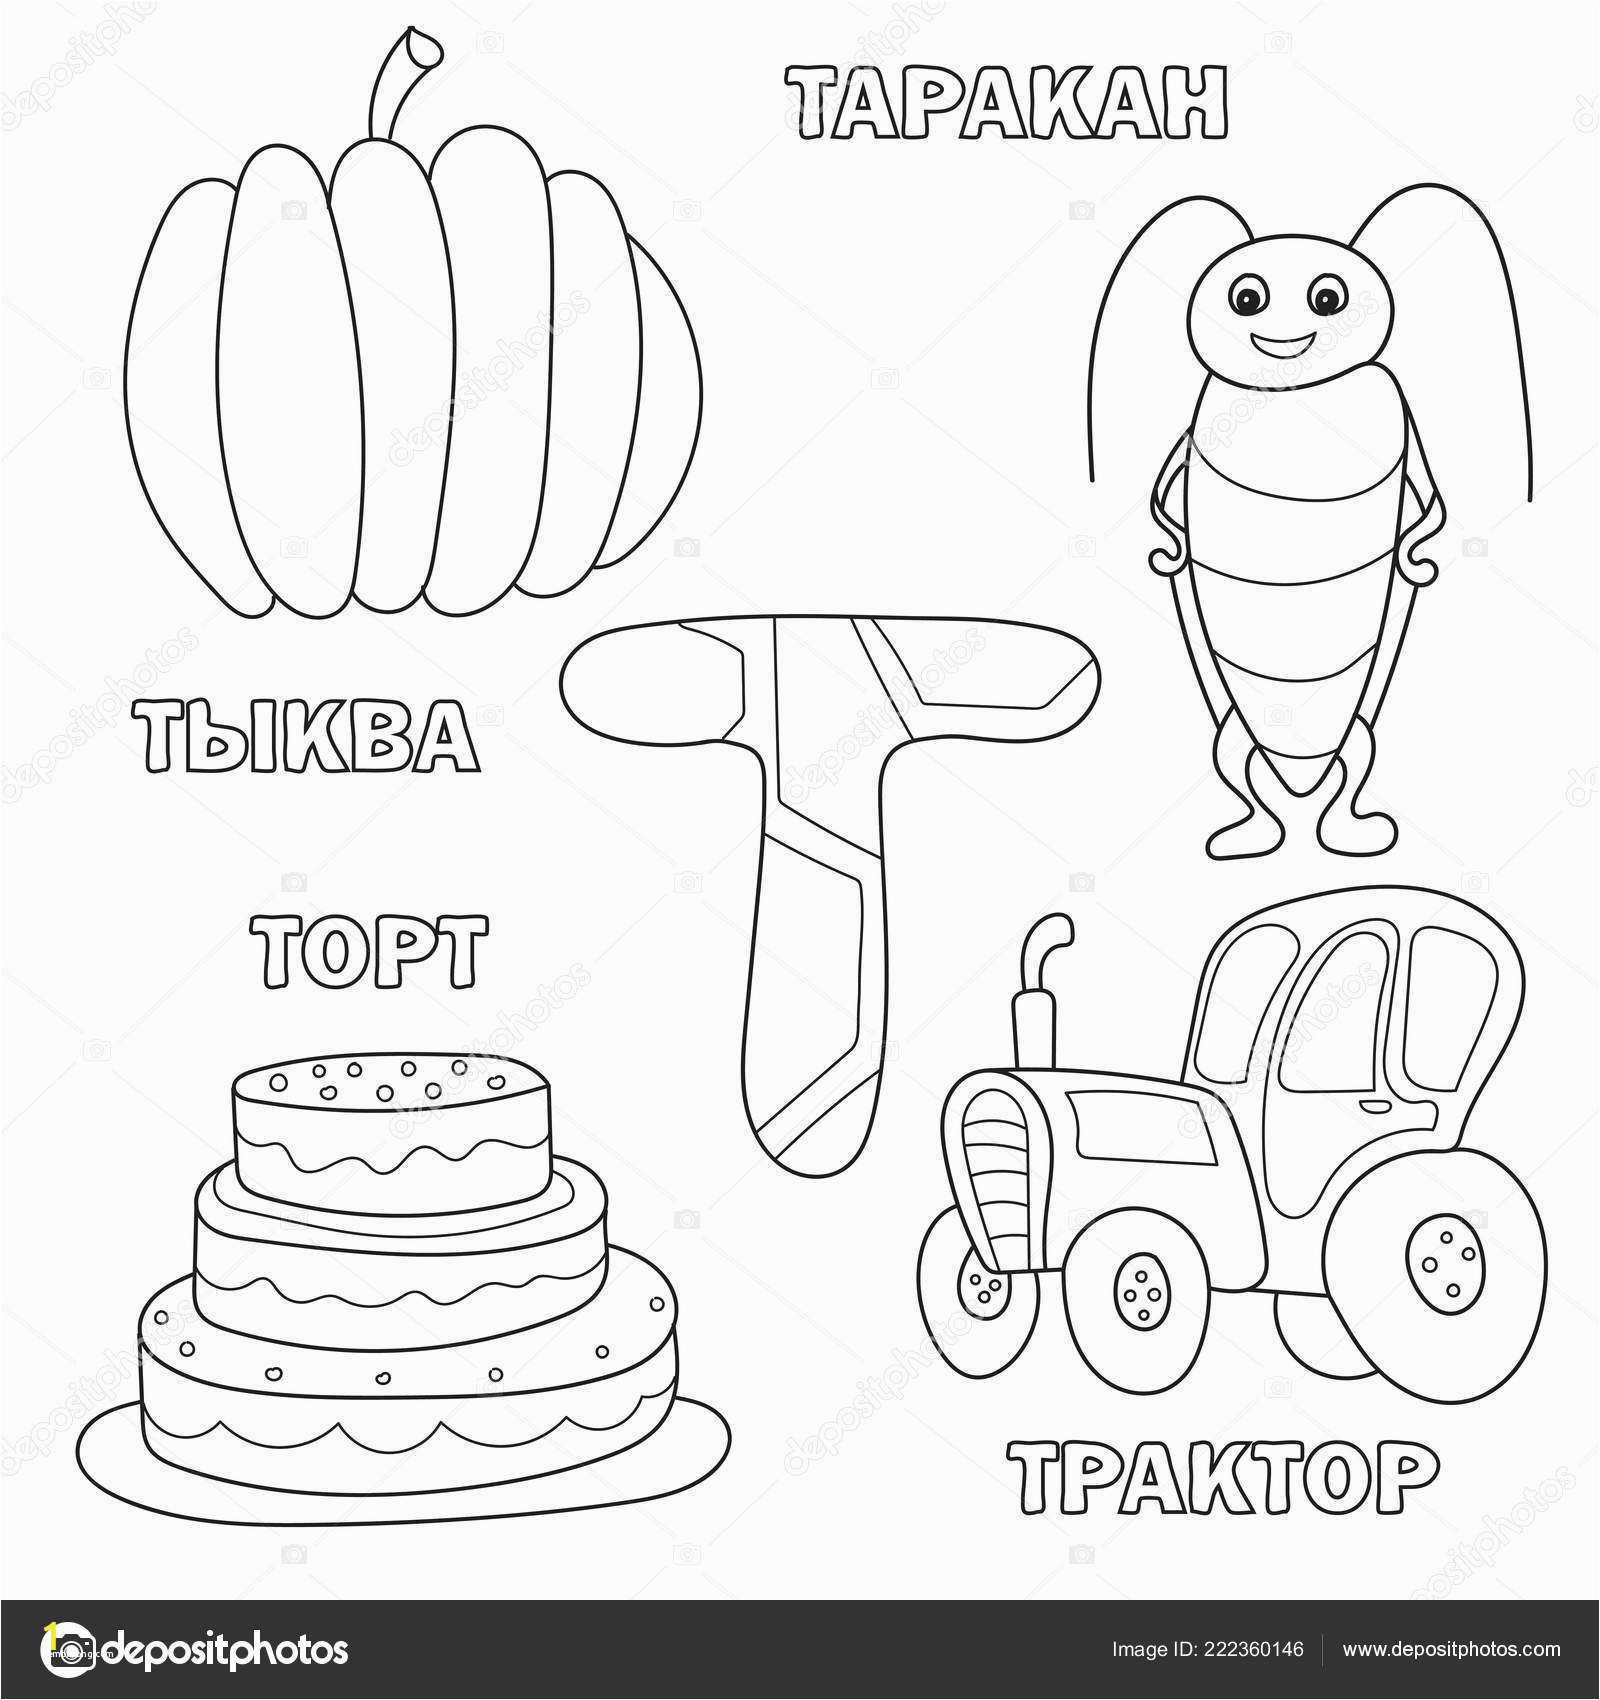 Coloring Pages Of Alphabet with Animals Coloring Pages Alphabet Coloring Pages for toddlers